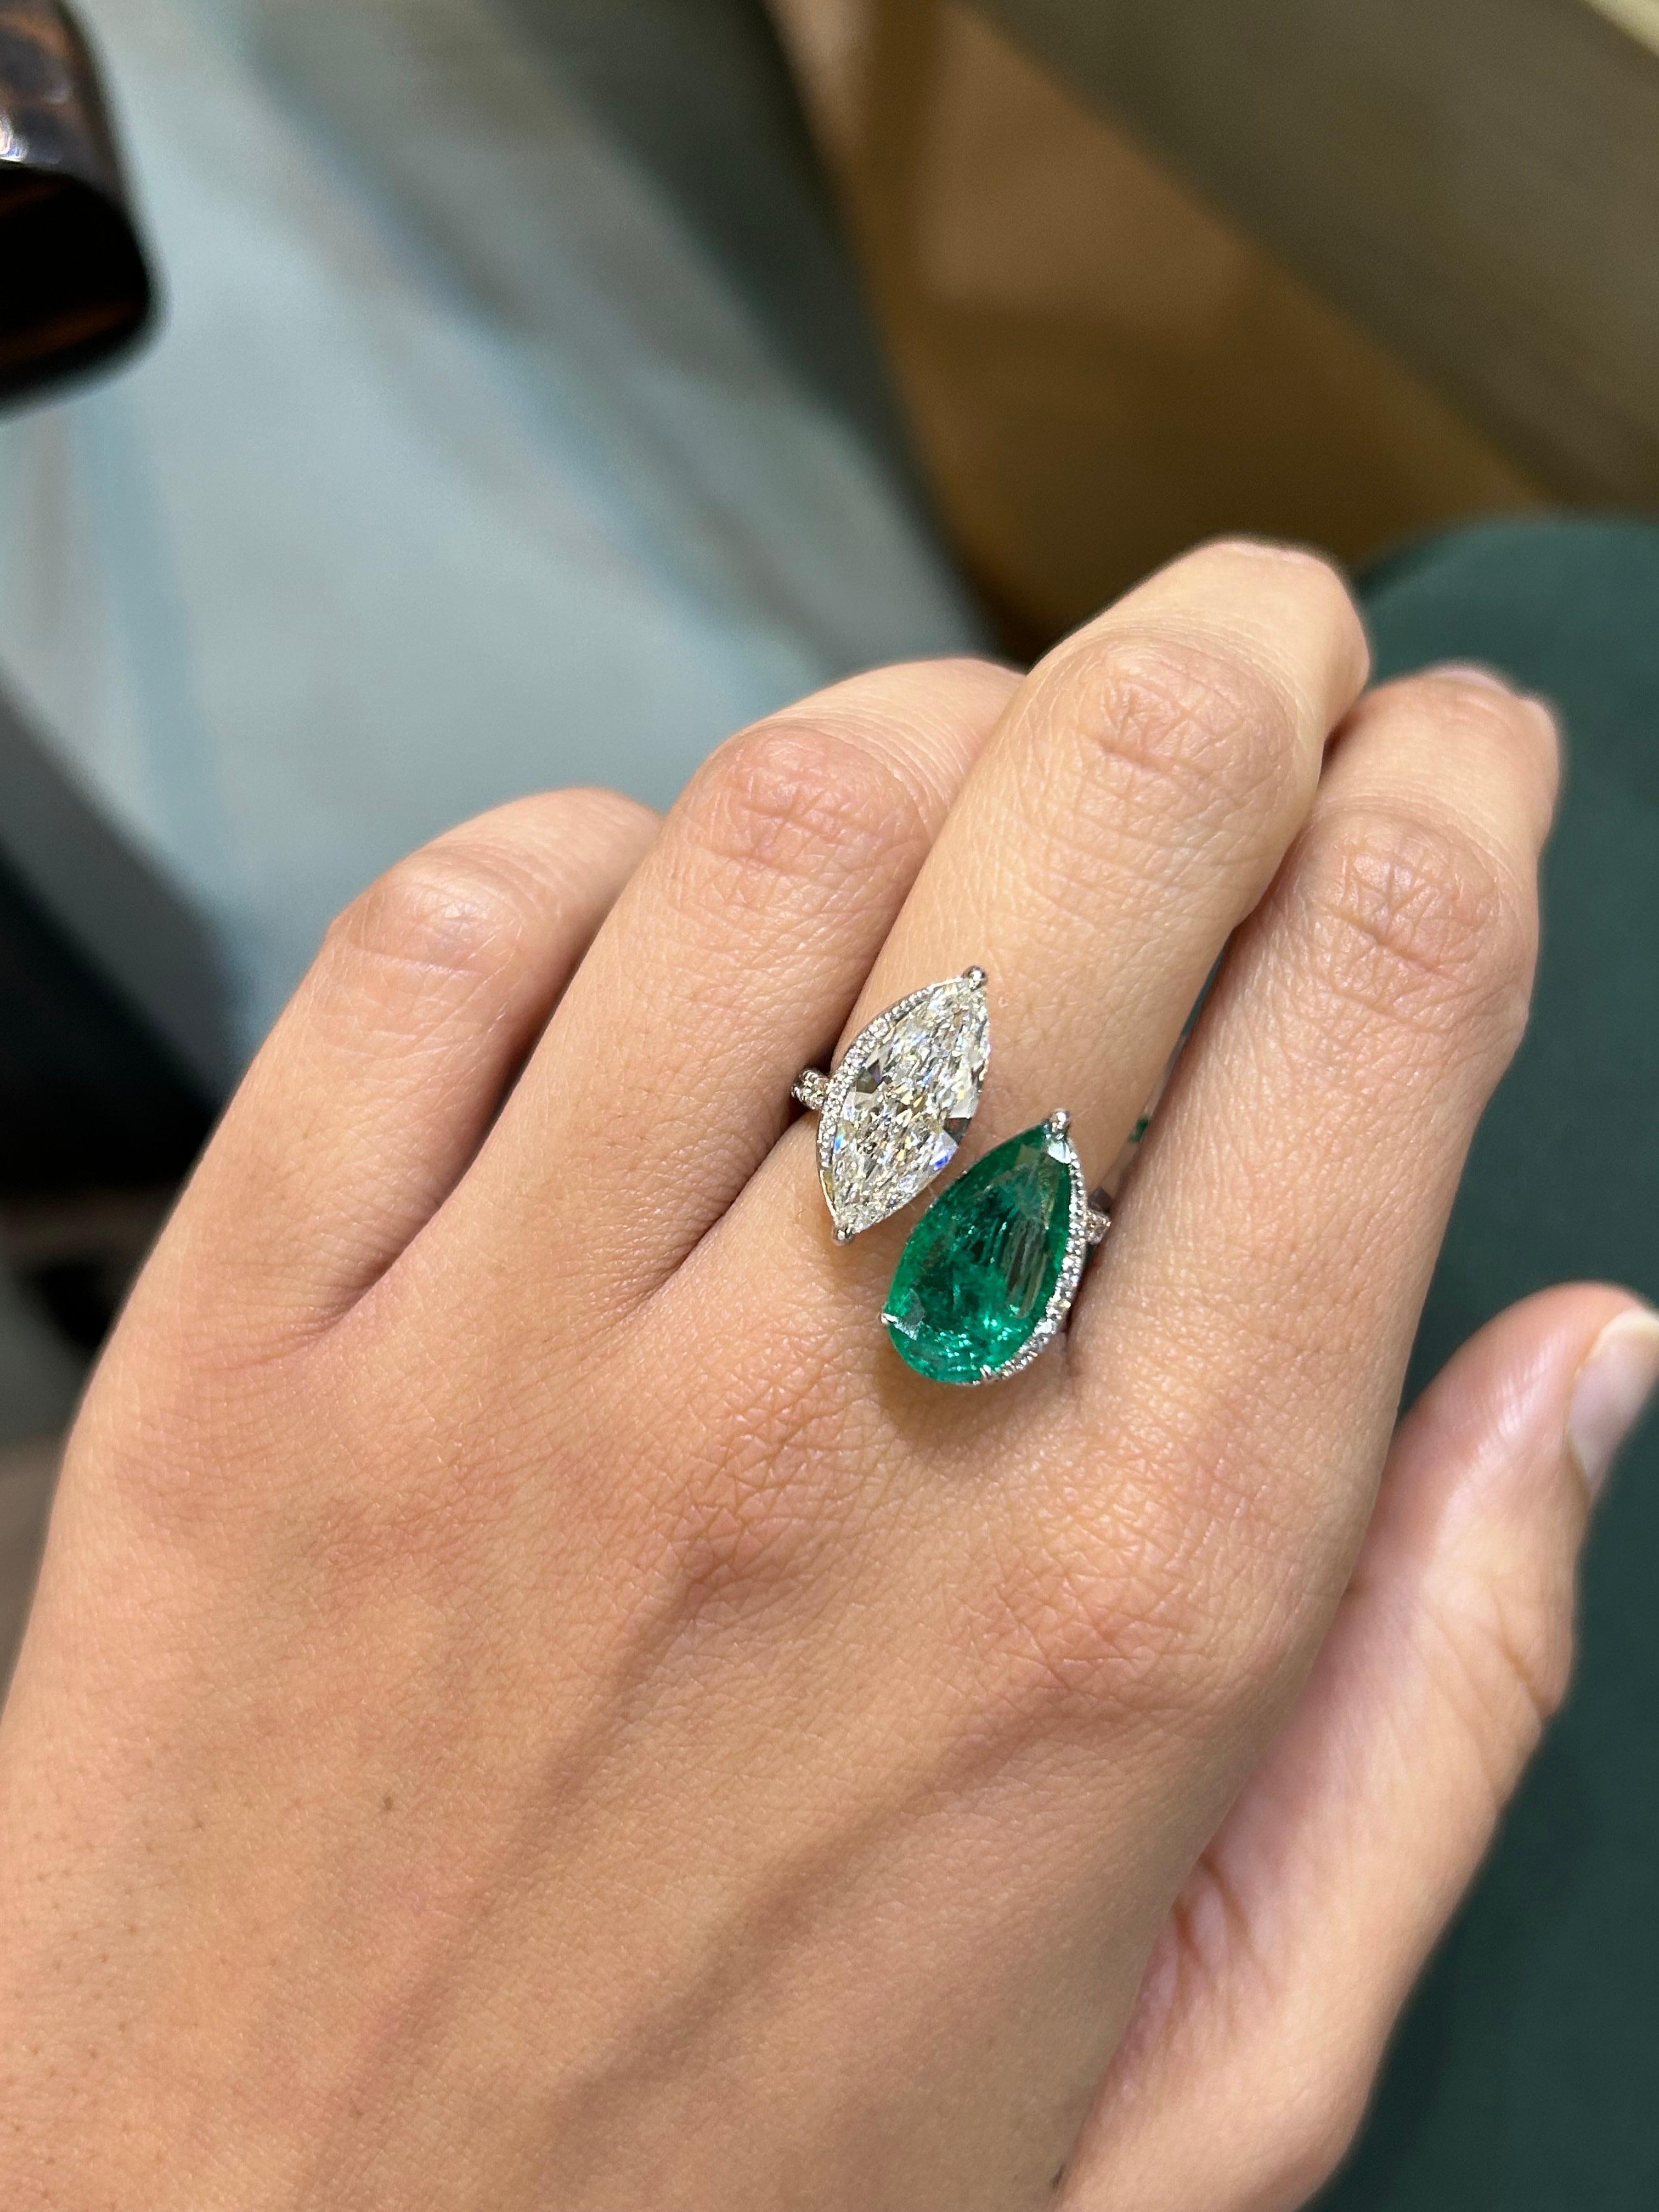 One of a kind, certified 2.01 carat H color SI1 clarity marquise shaped Diamond with 2.58 carat Zambian Emerald, and 0.32 carat round diamonds. All set in solid 18K White Gold. Currently sized at US7, can be resized. 